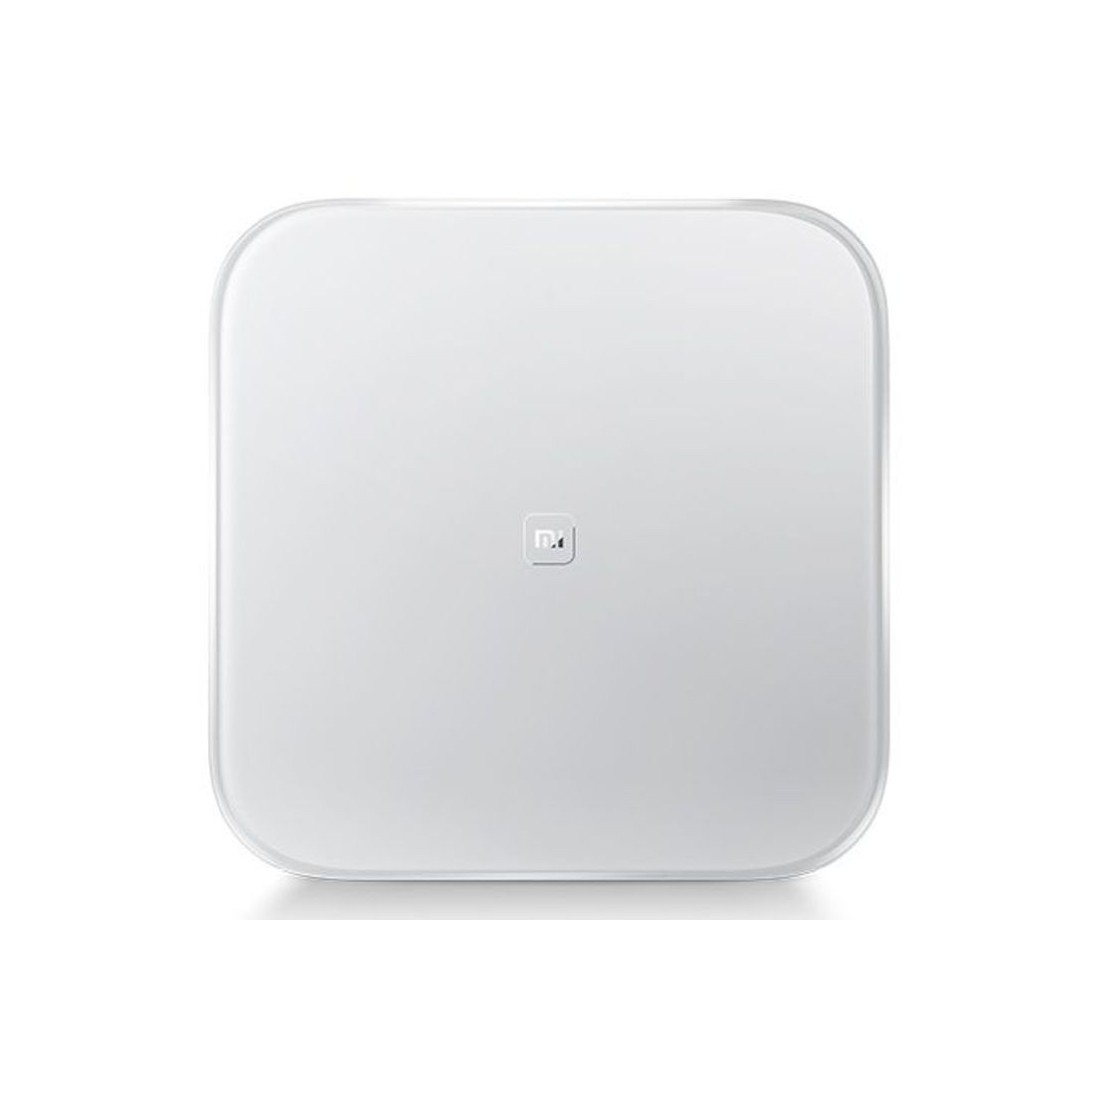 Xiaomi LED Display Connected Smart Bluetooth 4.0 Weighing Scales Digital Body Weight Scale